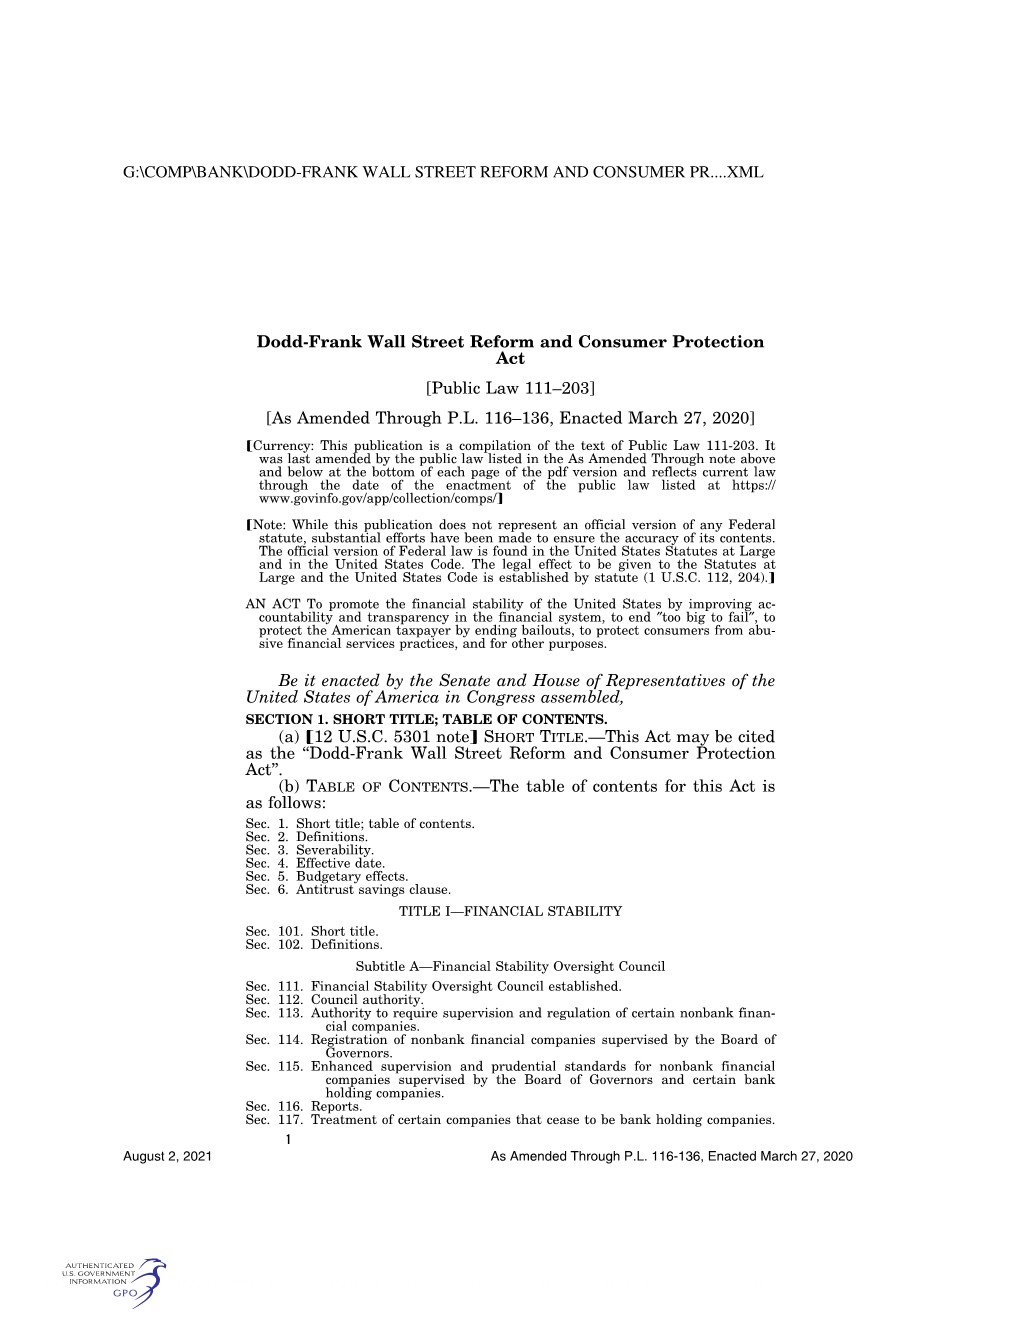 Dodd-Frank Wall Street Reform and Consumer Protection Act [Public Law 111–203] [As Amended Through P.L